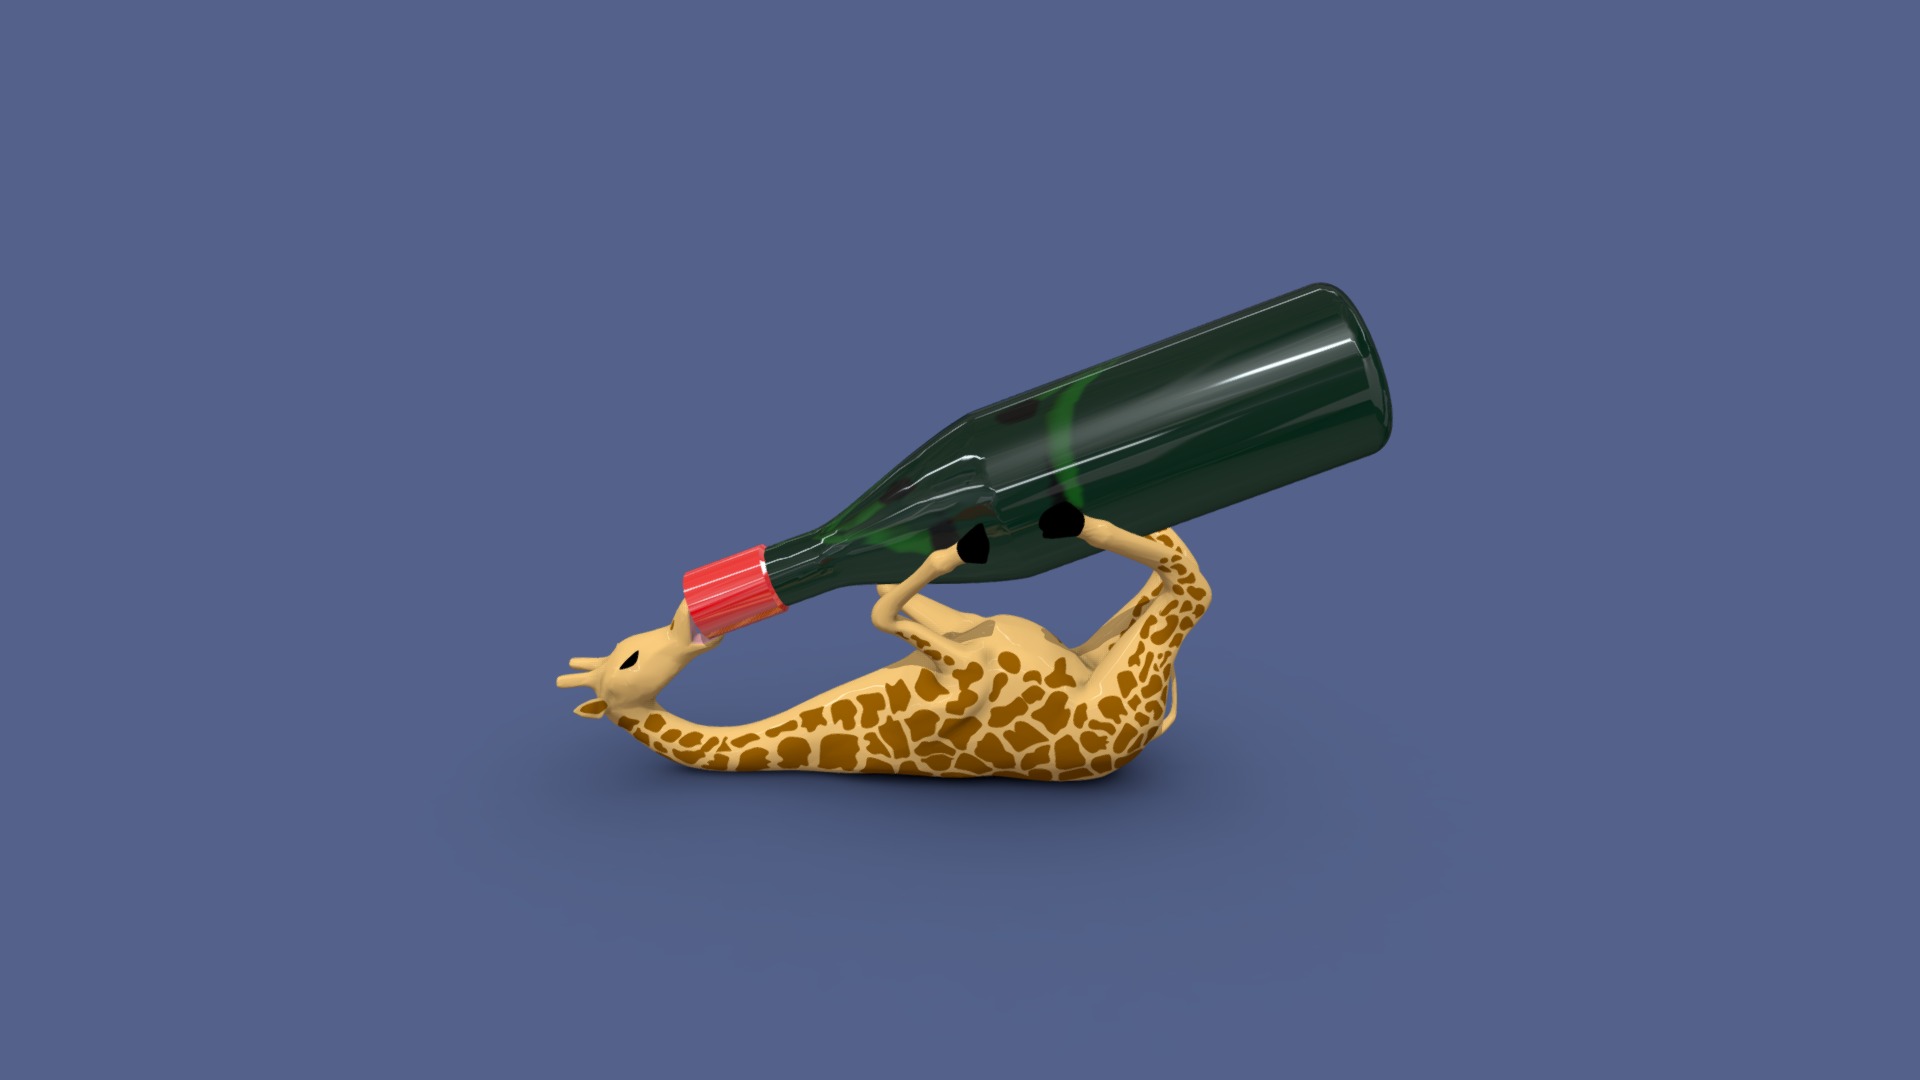 3D model Wine Giraffe - This is a 3D model of the Wine Giraffe. The 3D model is about a toy dinosaur holding a bottle.